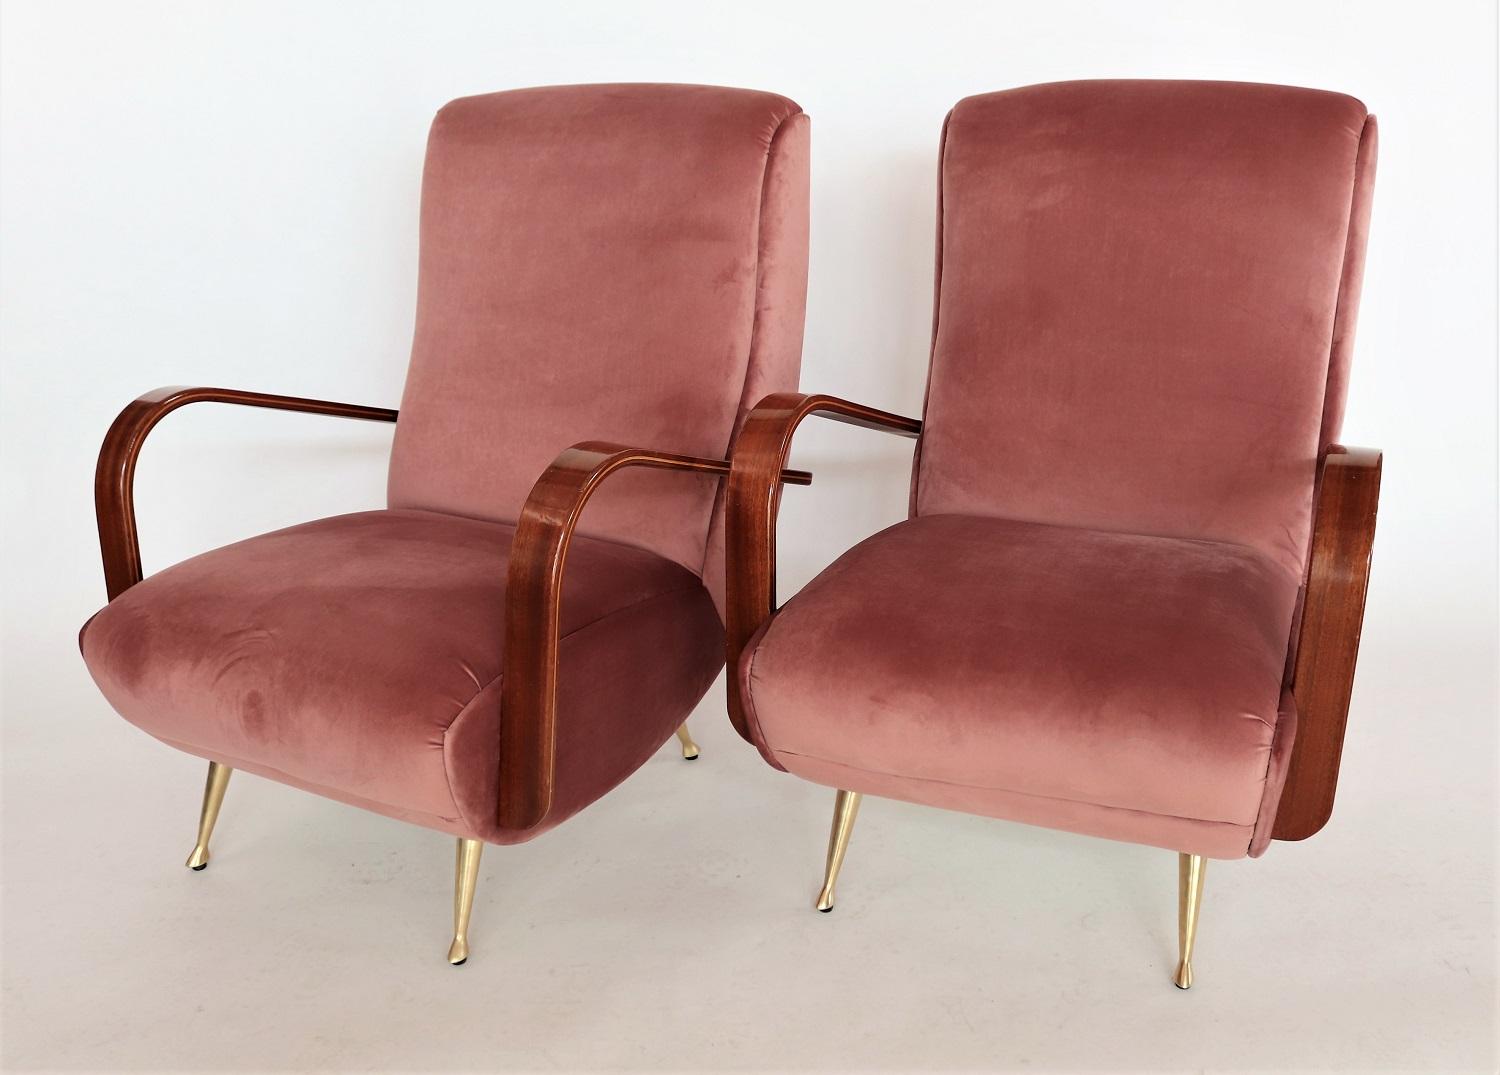 Italian Midcentury Armchairs in Mahogany, Brass and Coral Red Velvet, 1950s 5